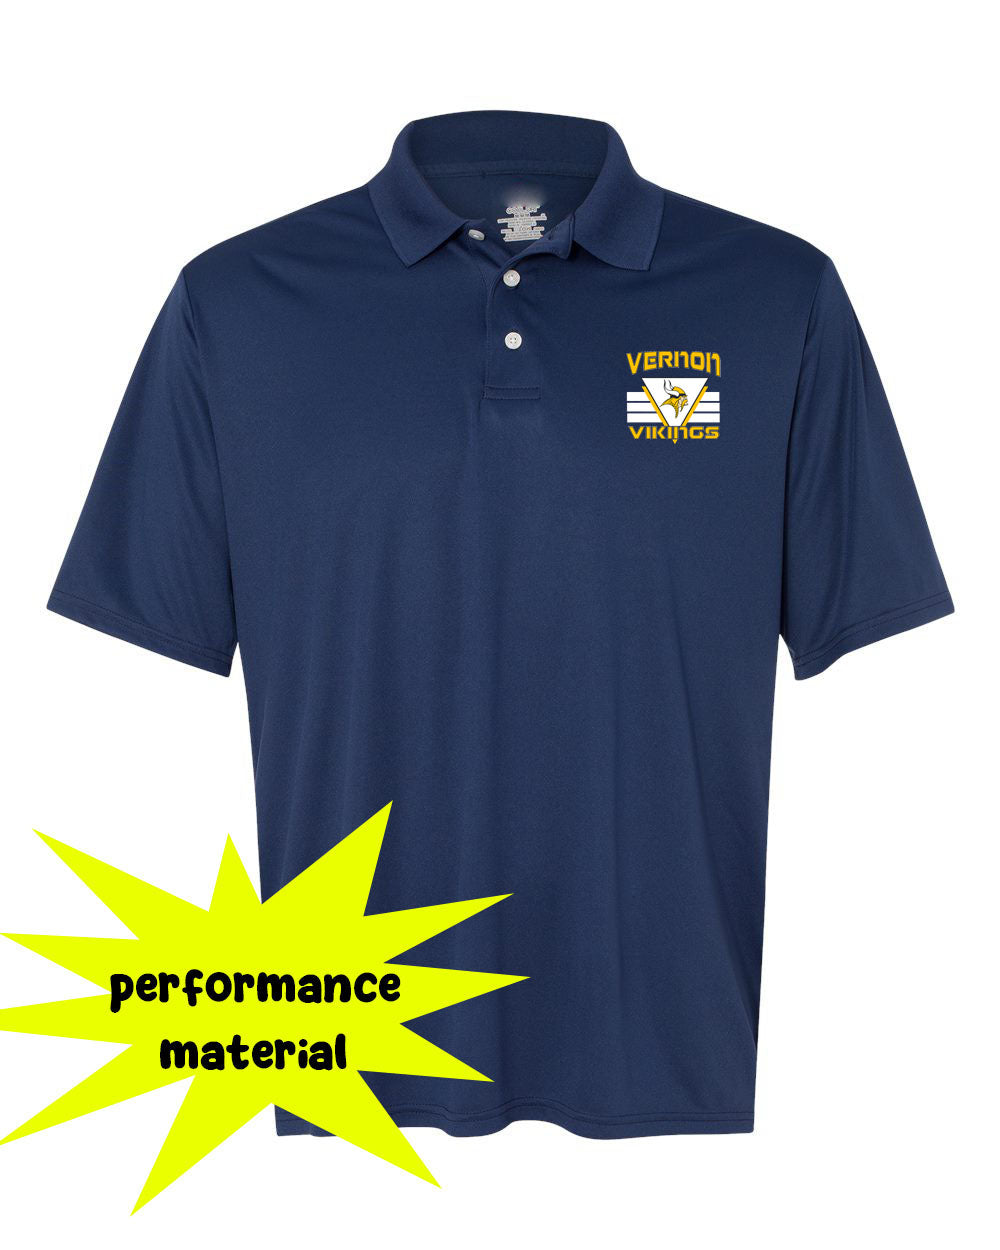 Rolling Hills Performance Material Polo T-Shirt Design 9